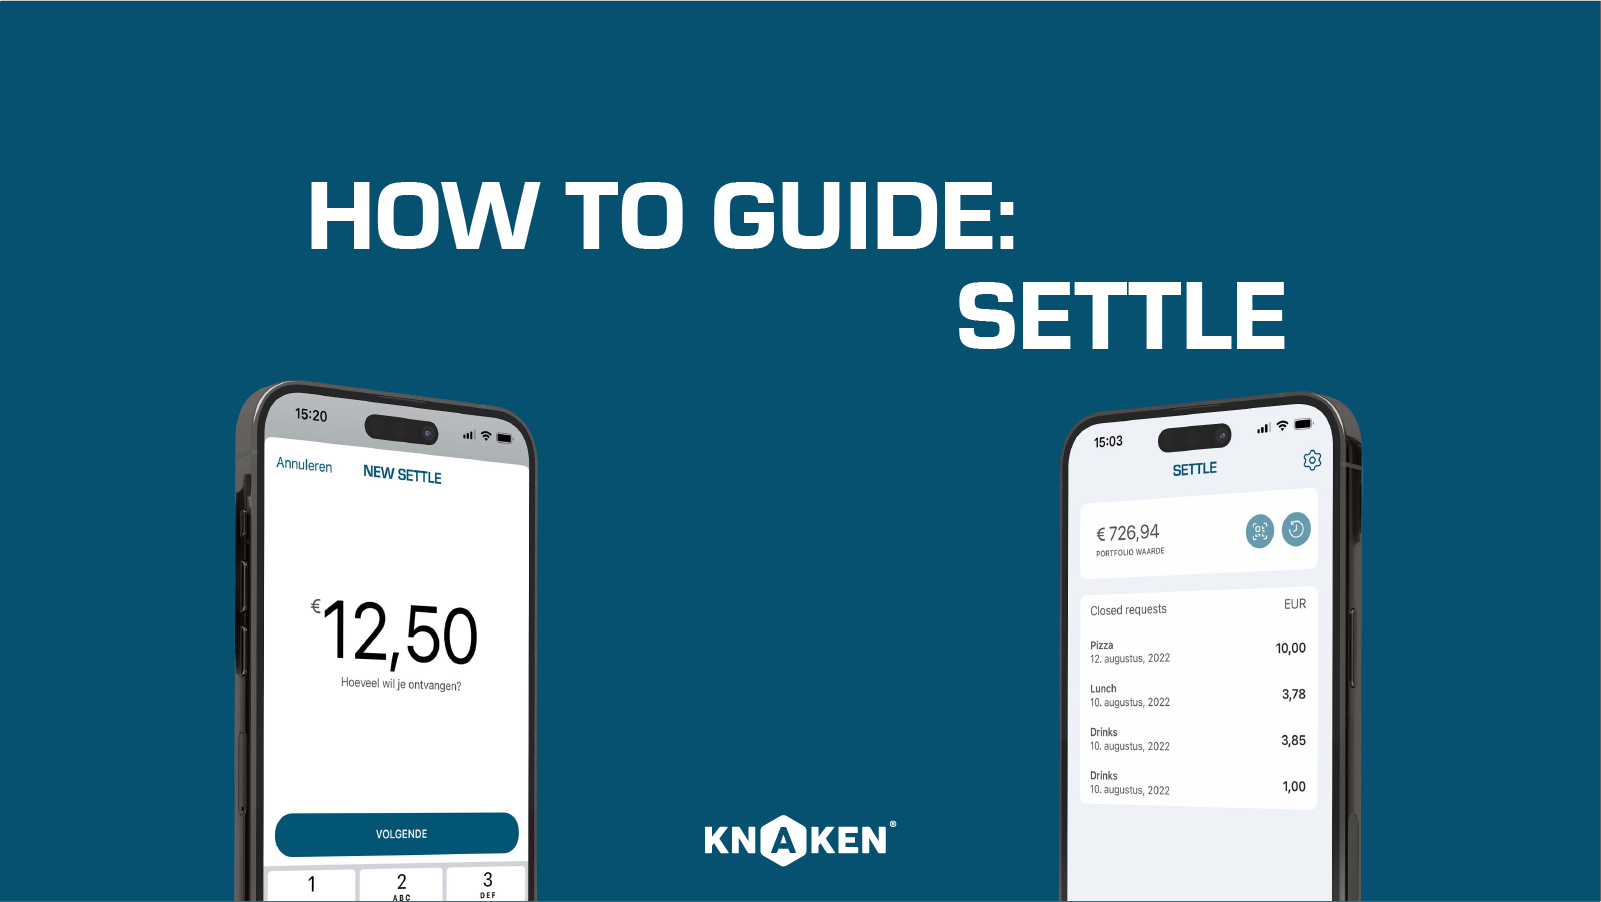 How to Guide: Settle